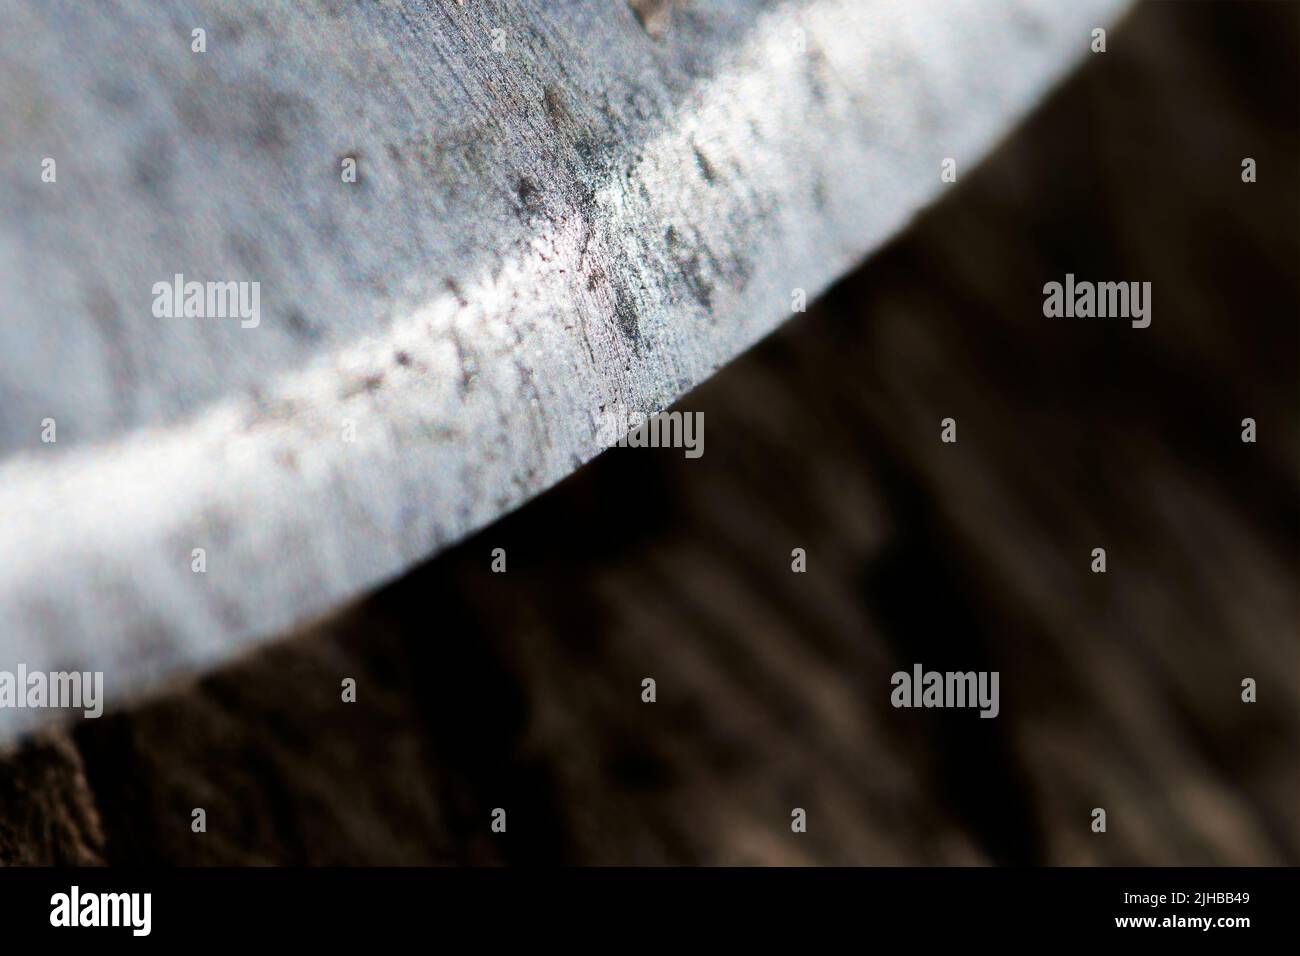 Extreme close-up of a steel cutting tool with a curved sharpd for cutting. Stock Photo